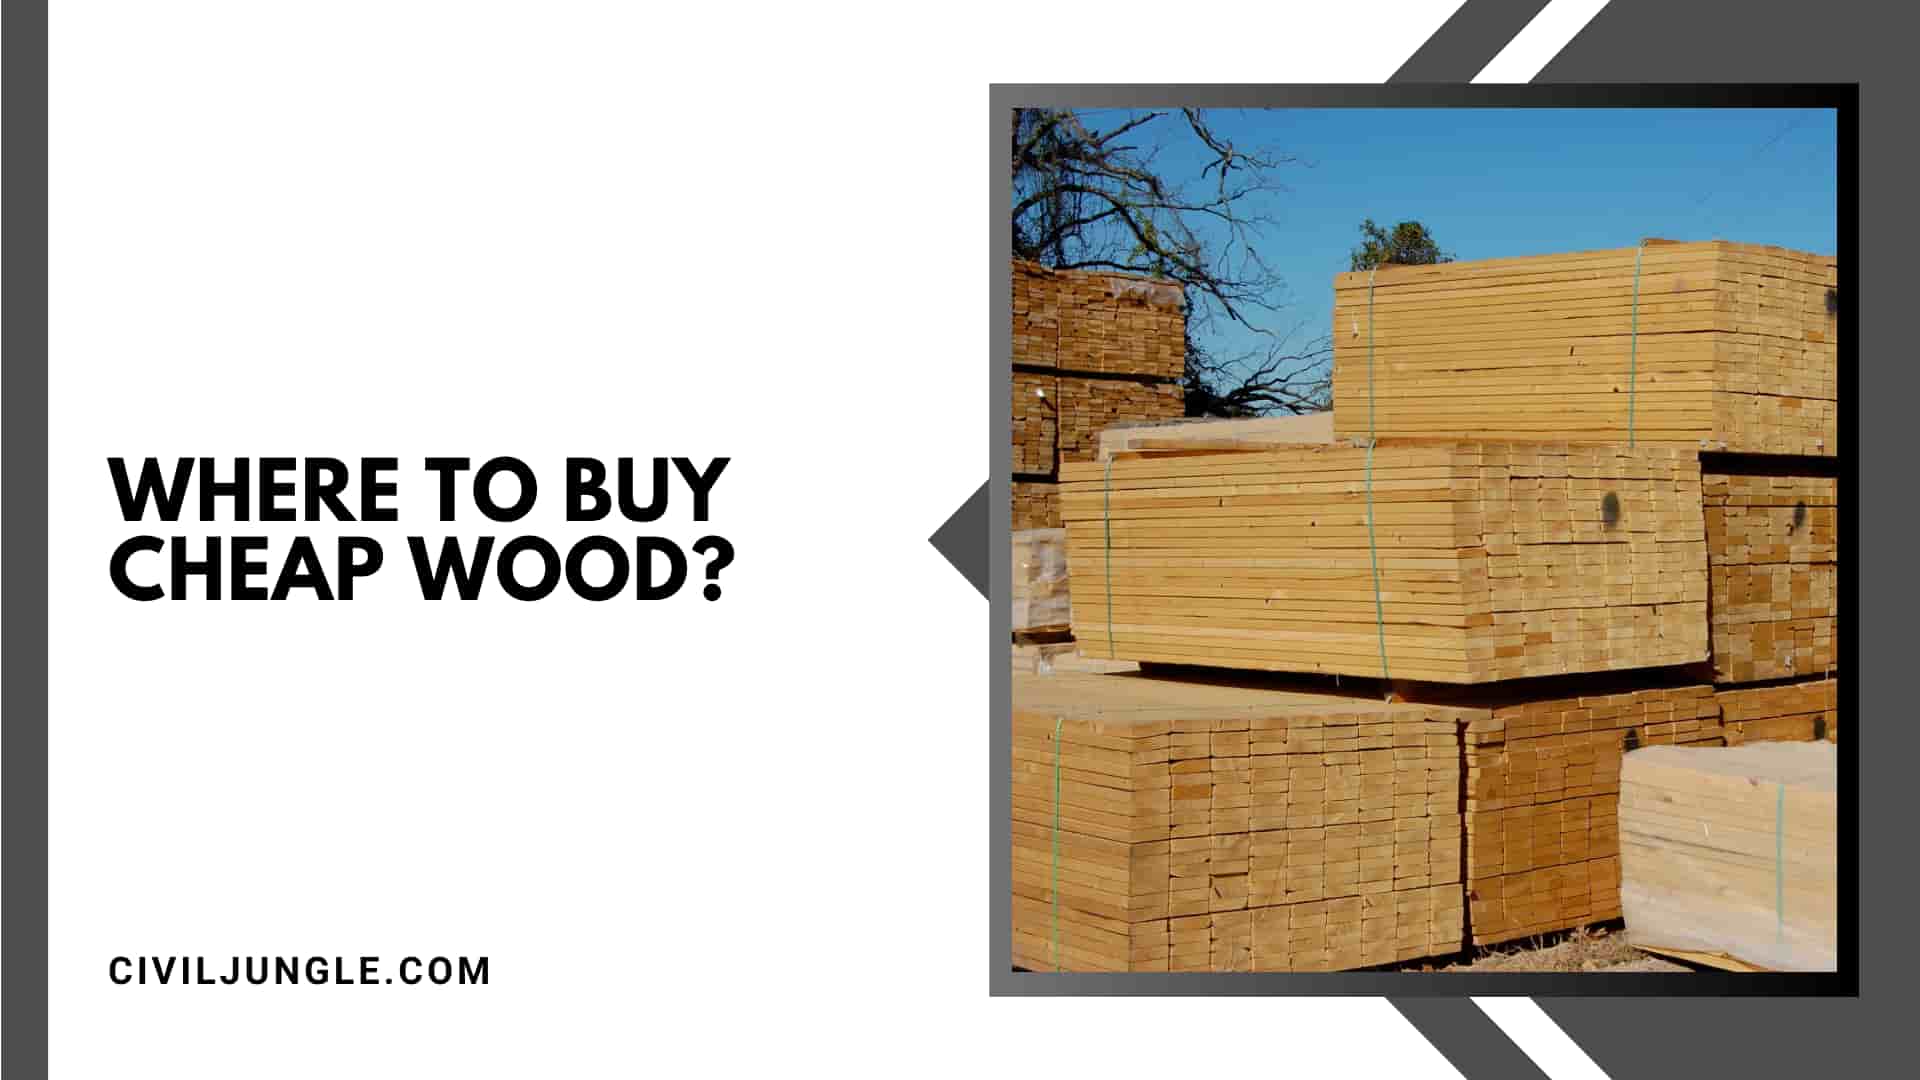 Where to Buy Cheap Wood?